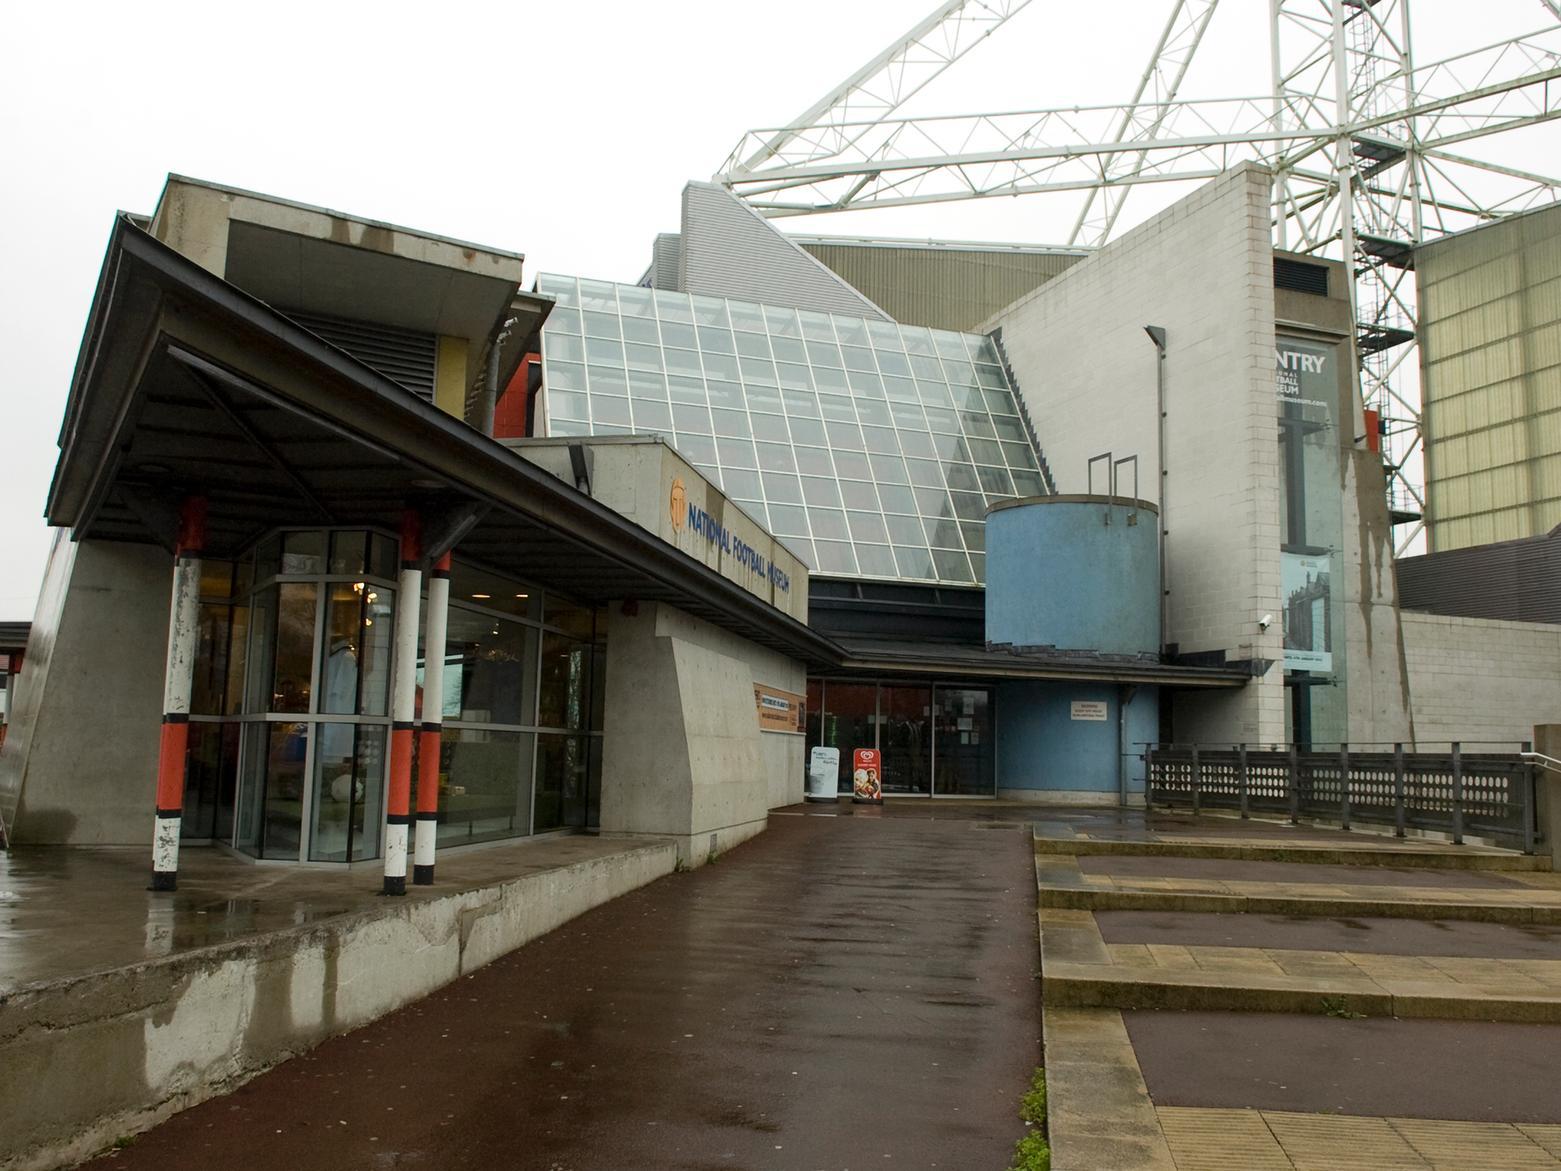 The museum, home to a collection of over 140,000 boots, balls, programmes, paintings, postcards and ceramics was originally opened in the city in 2001. Sadly for Prestonin 2010 the venue closed, and eventually moved toManchester in 2012.